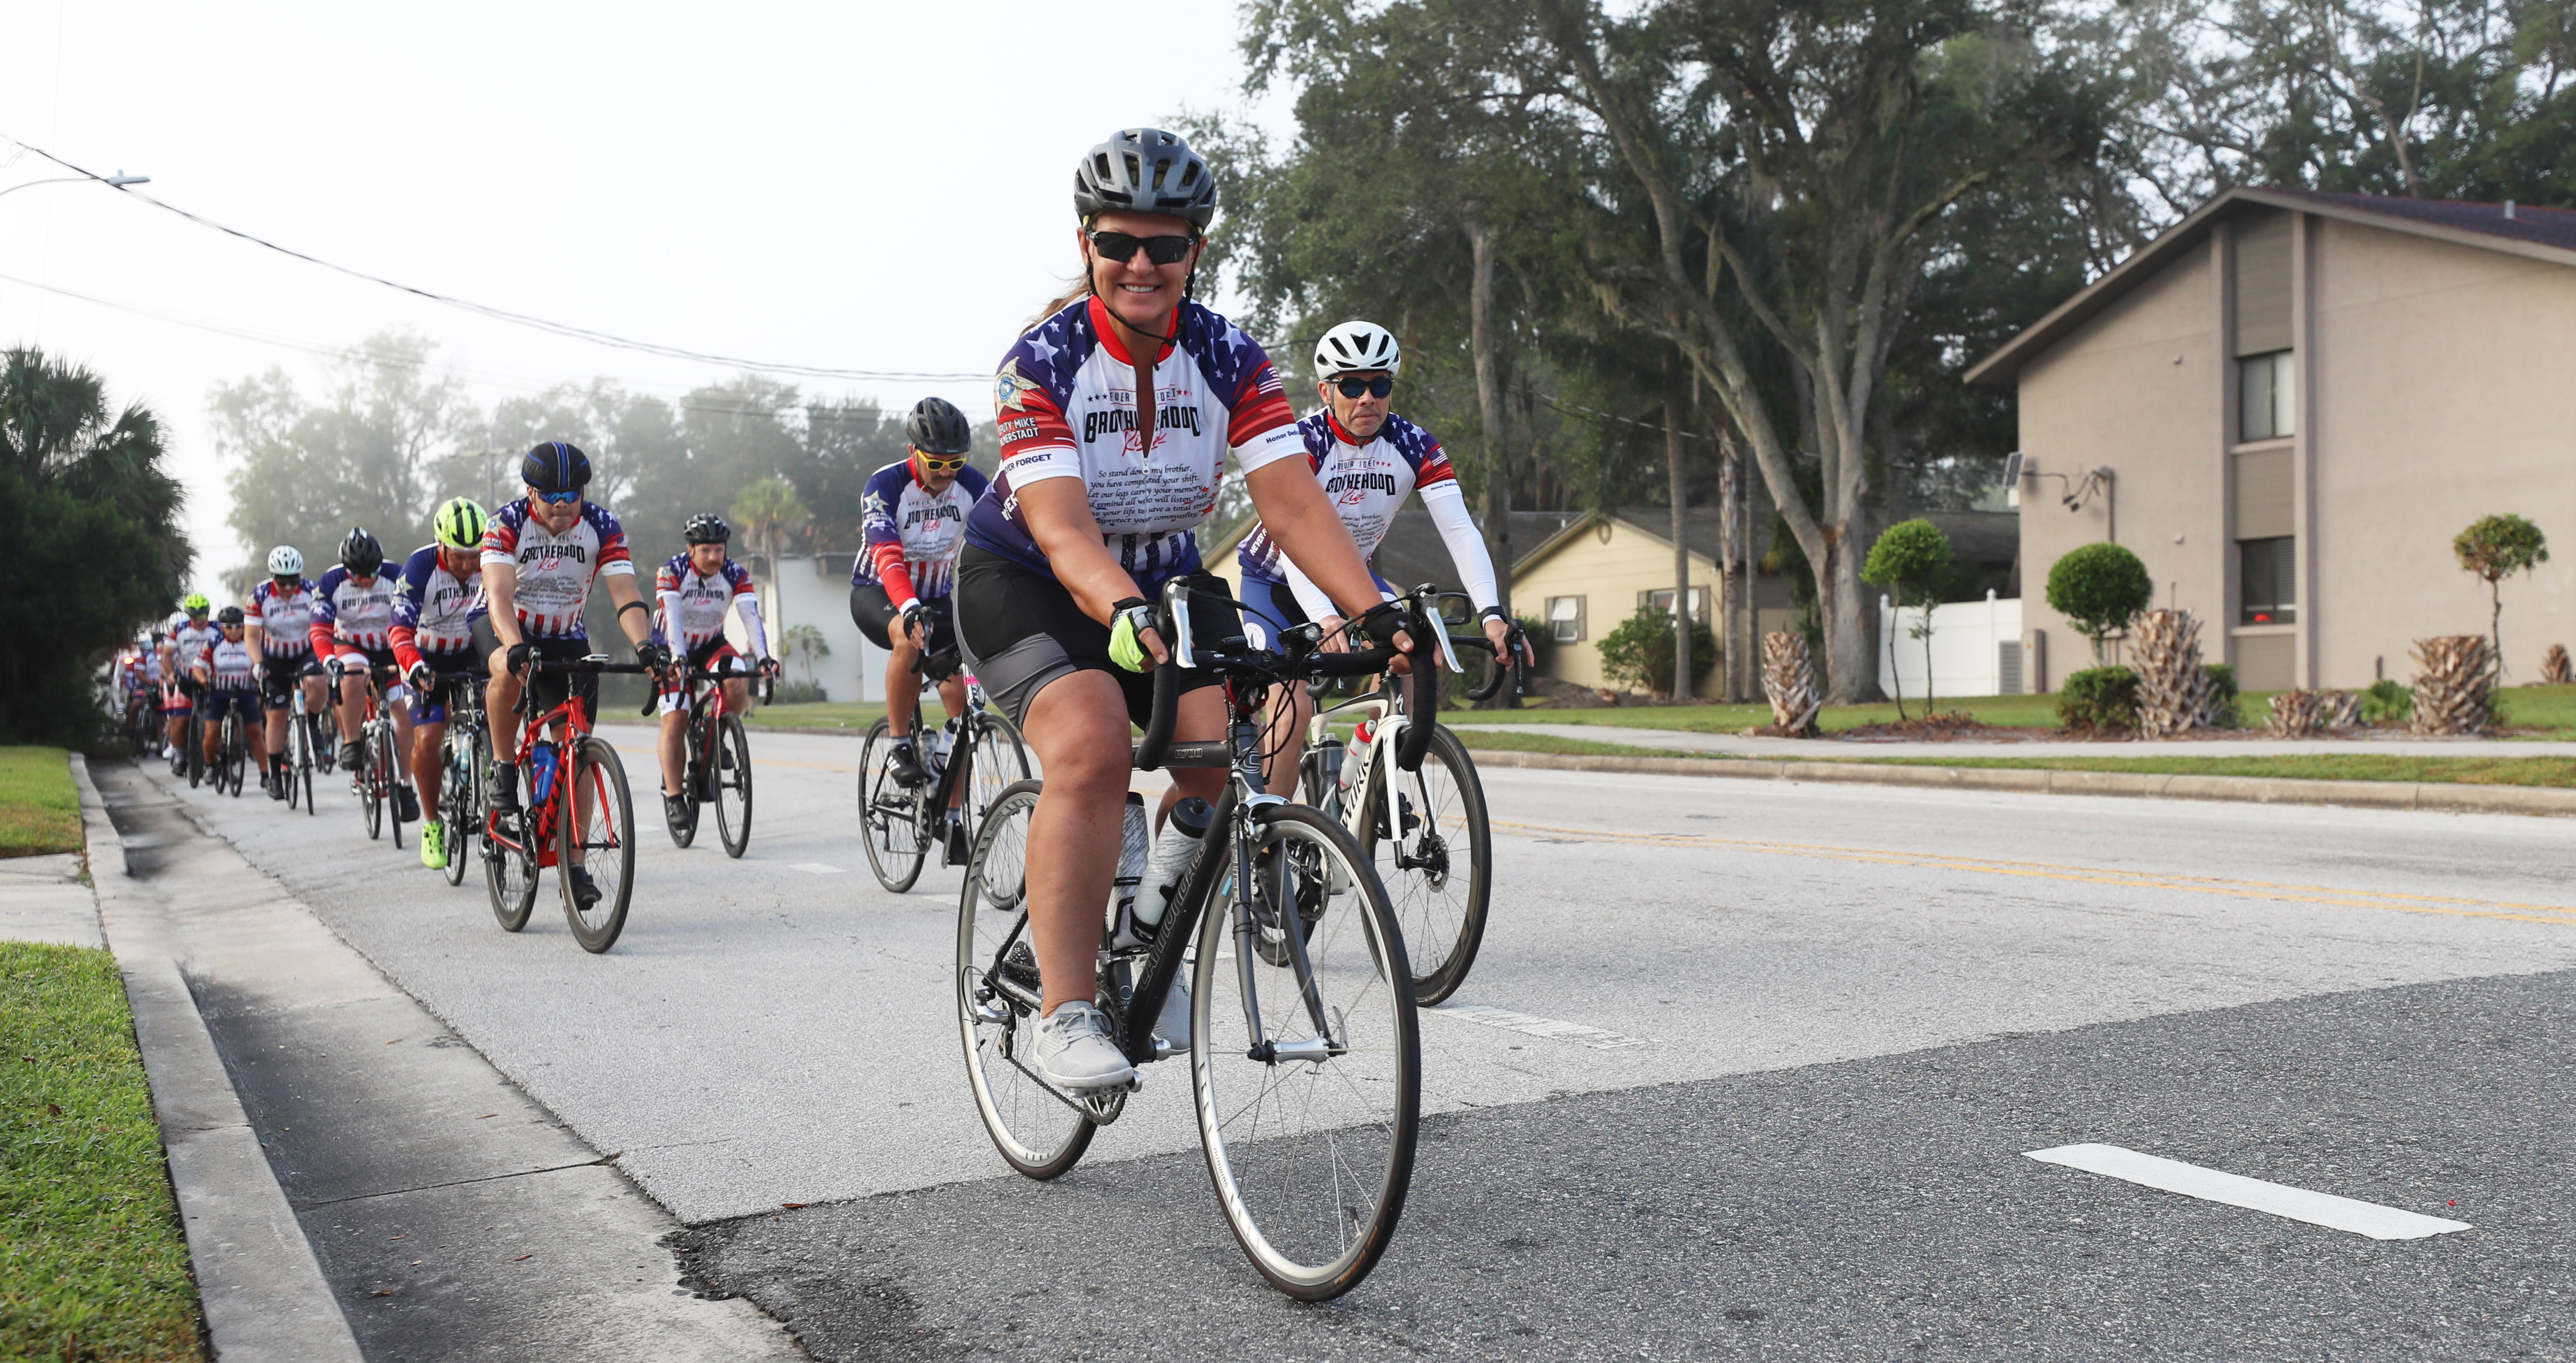 Cyclist participating in the Brotherhood Ride depart Elks Lodge 1079, on their way to Cocoa Beach, on Tuesday, October 31, 2023. The ride is dedicated to the 28 Florida Fallen First Responders who died in the line of duty in 2022 while protecting their communities. They started in Naples and will end their 9-day ride through Florida in Miami.(Ricardo Ramirez Buxeda/ Orlando Sentinel)